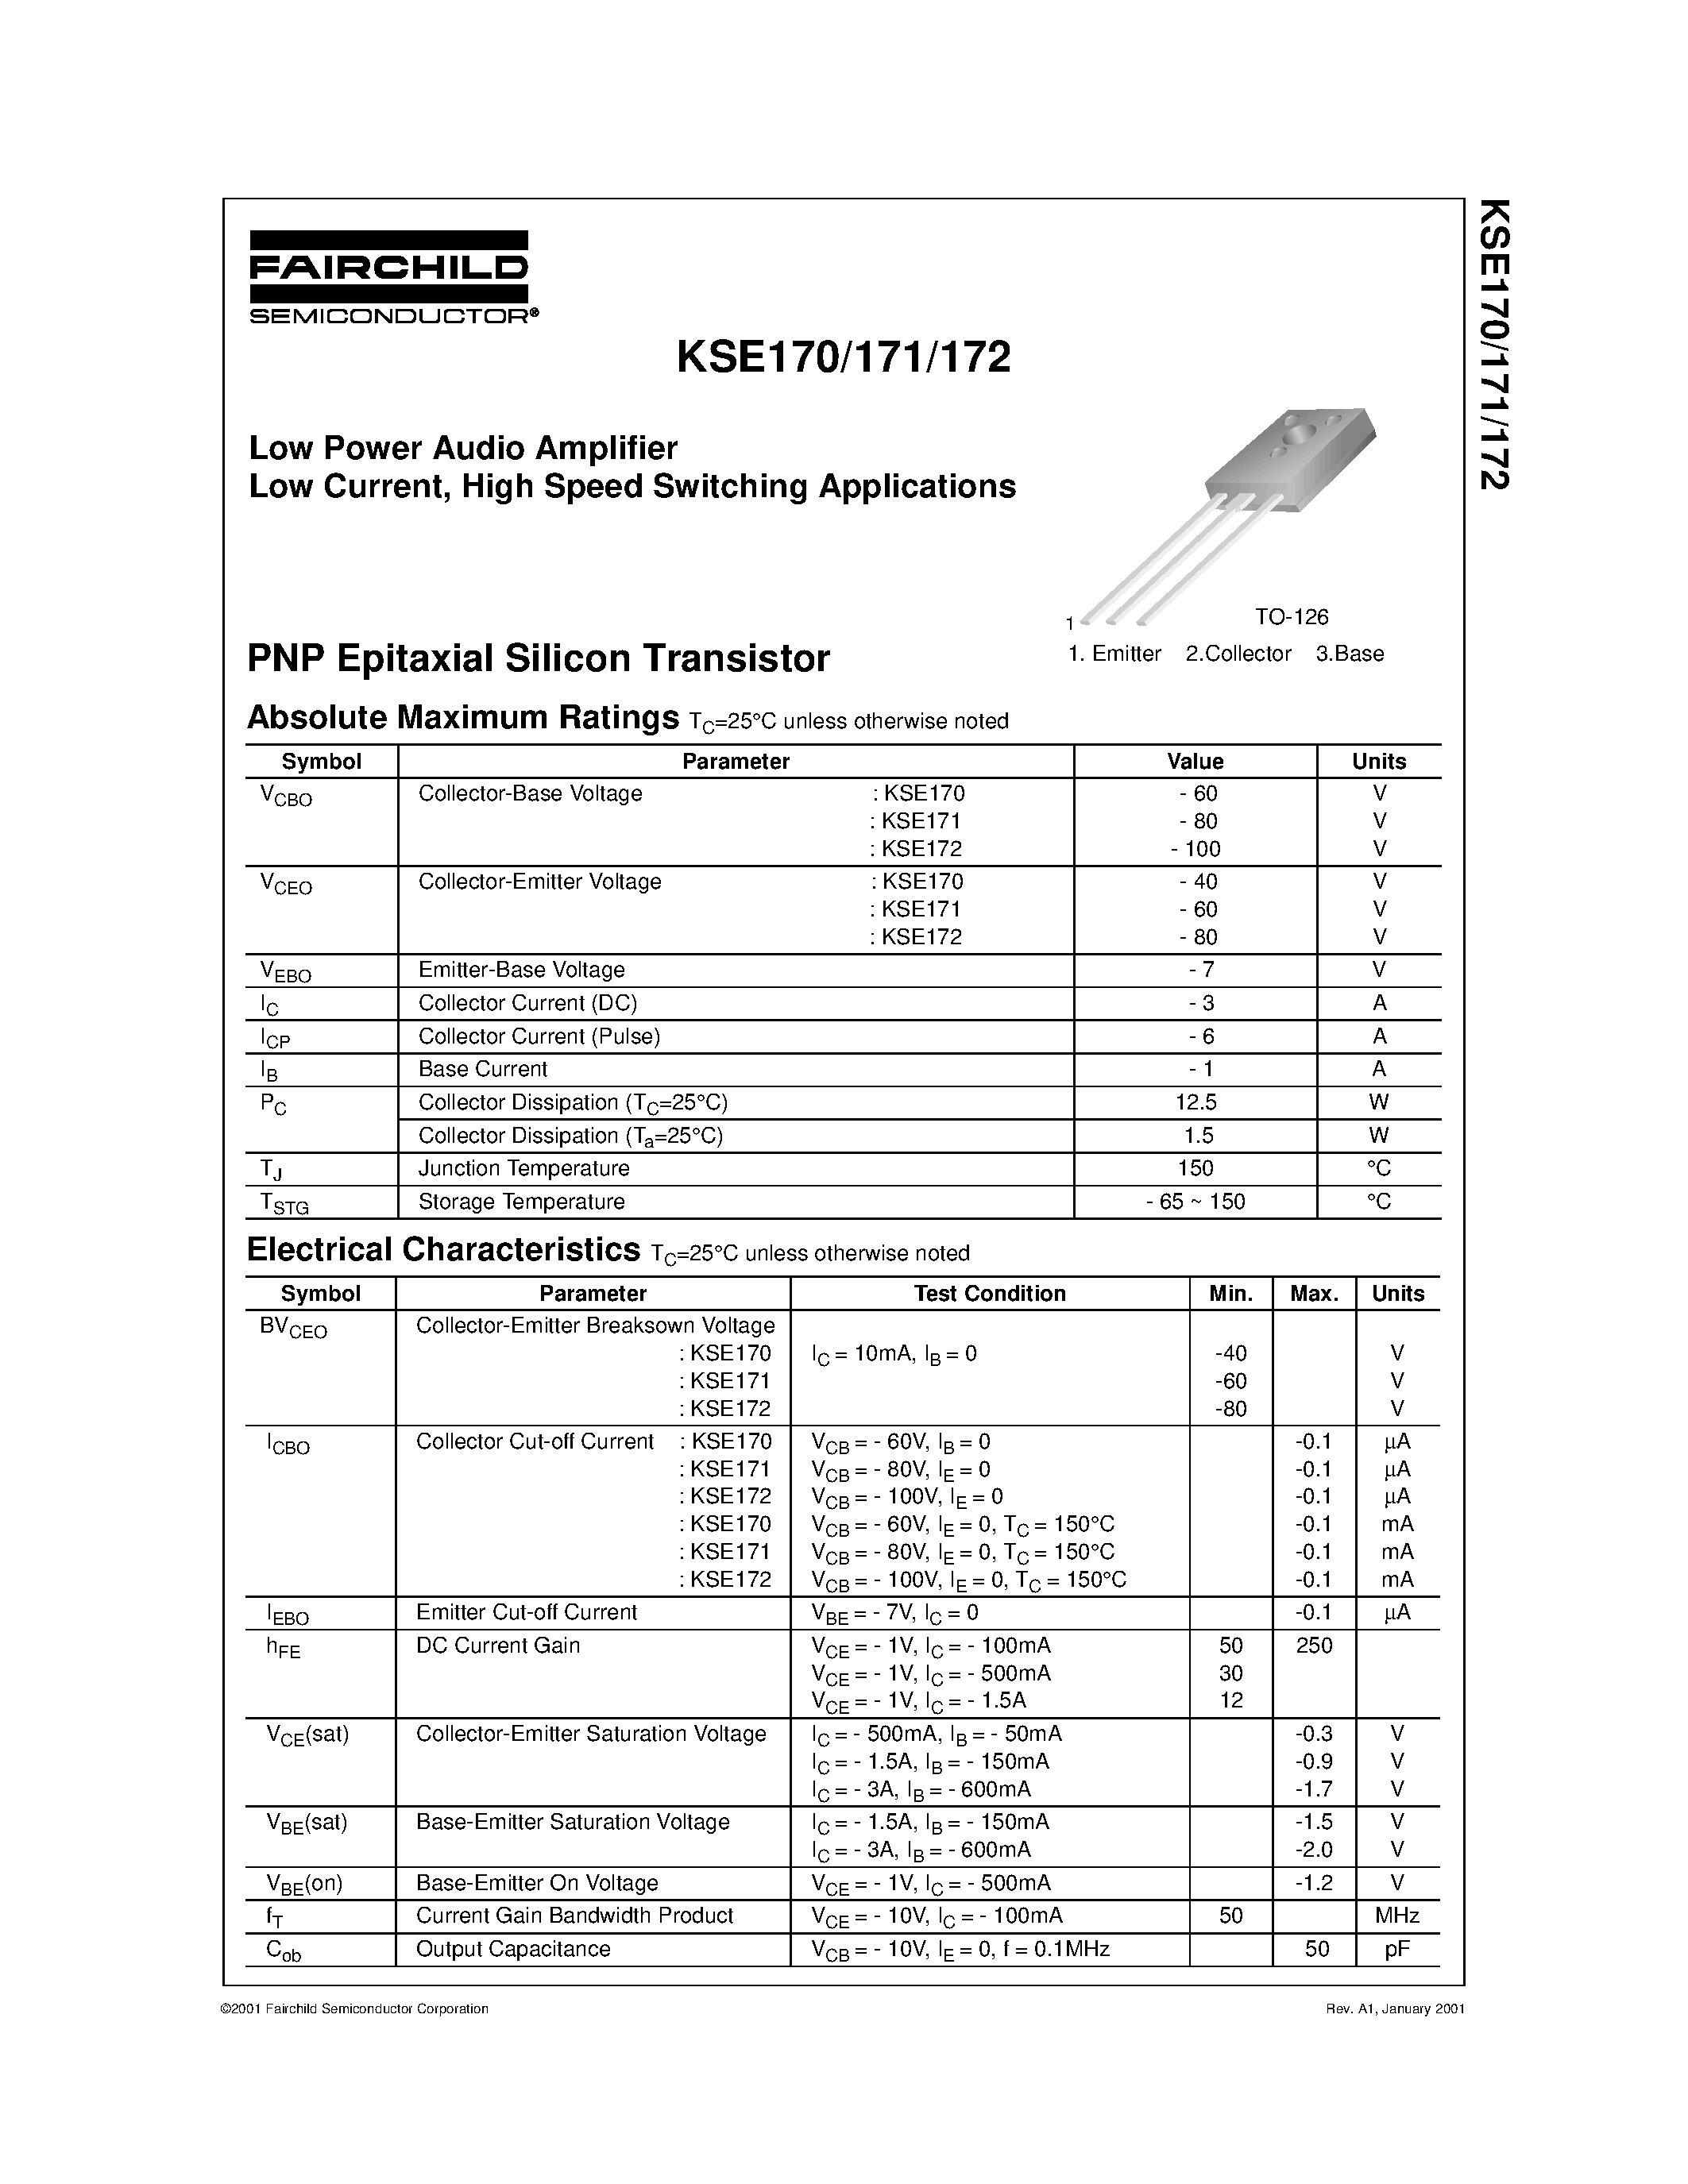 Datasheet KSE170 - Low Power Audio Amplifier Low Current/ High Speed Switching Applications page 1